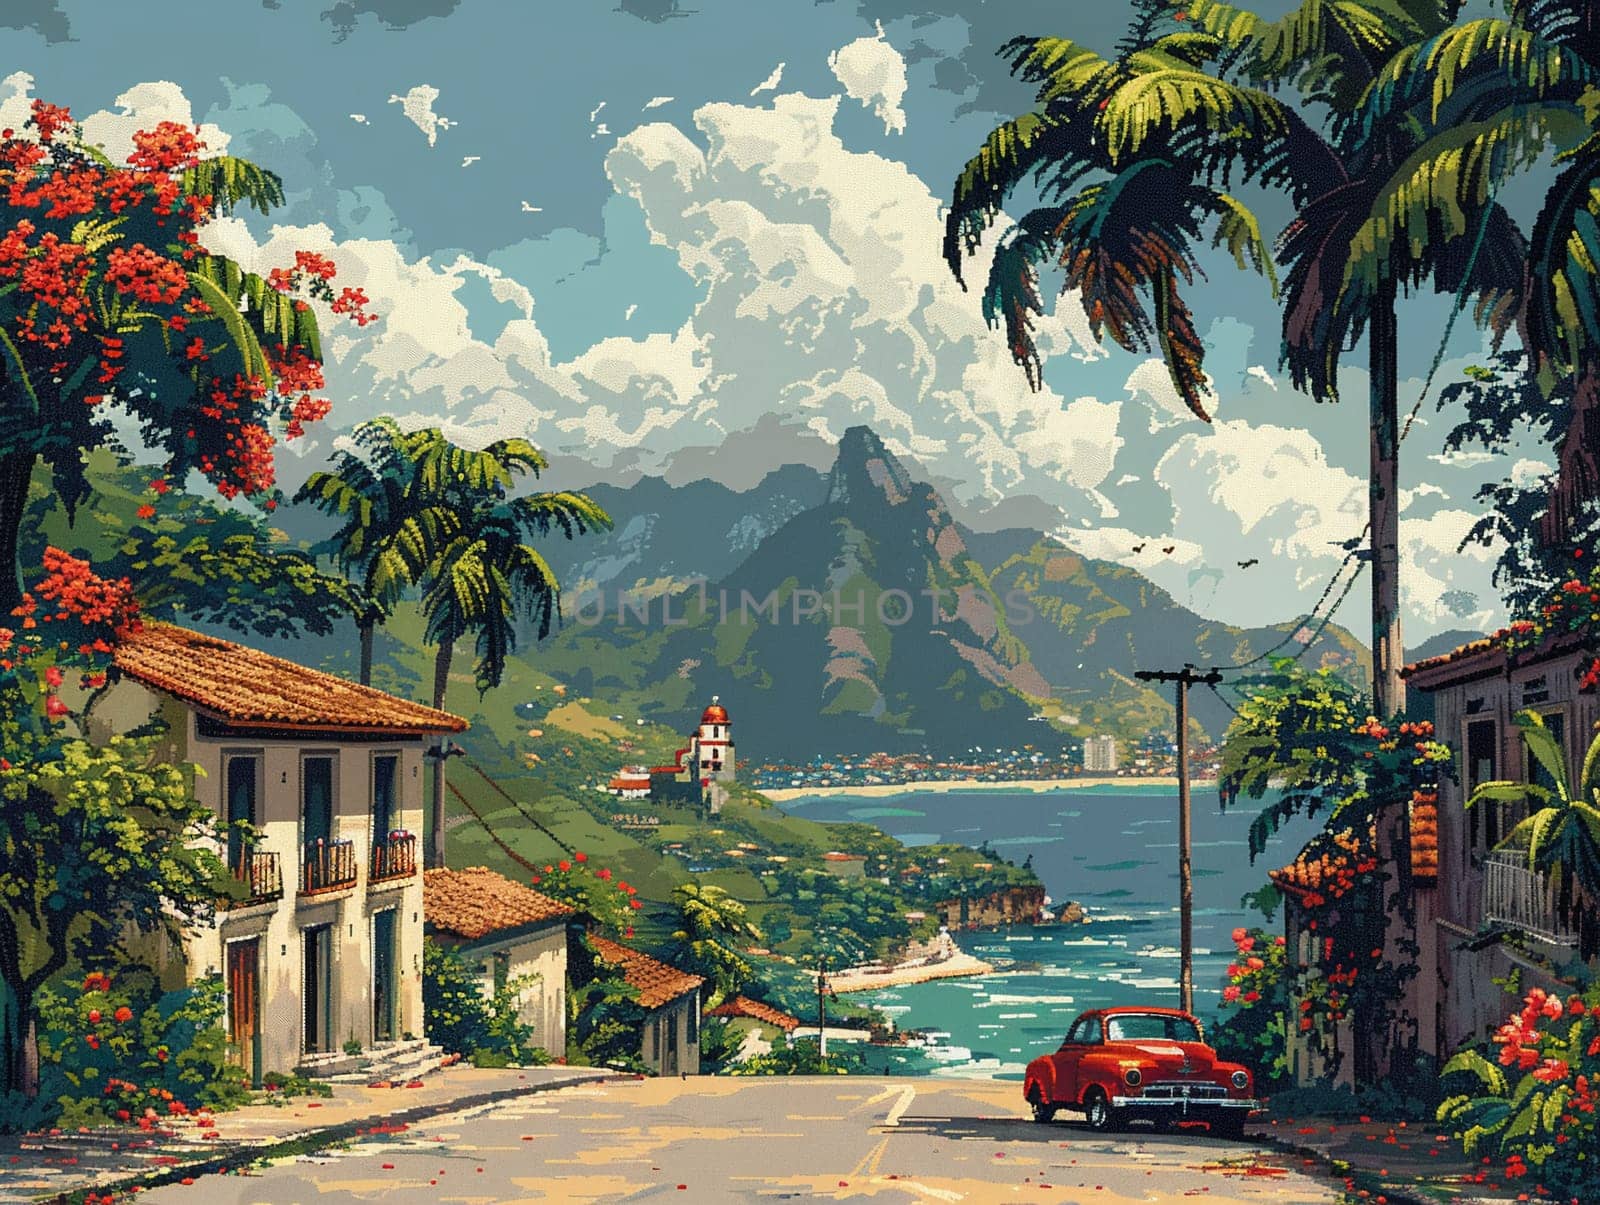 Pixelated Versions of Vintage Travel Posters Destinations blur into nostalgic pixels by Benzoix